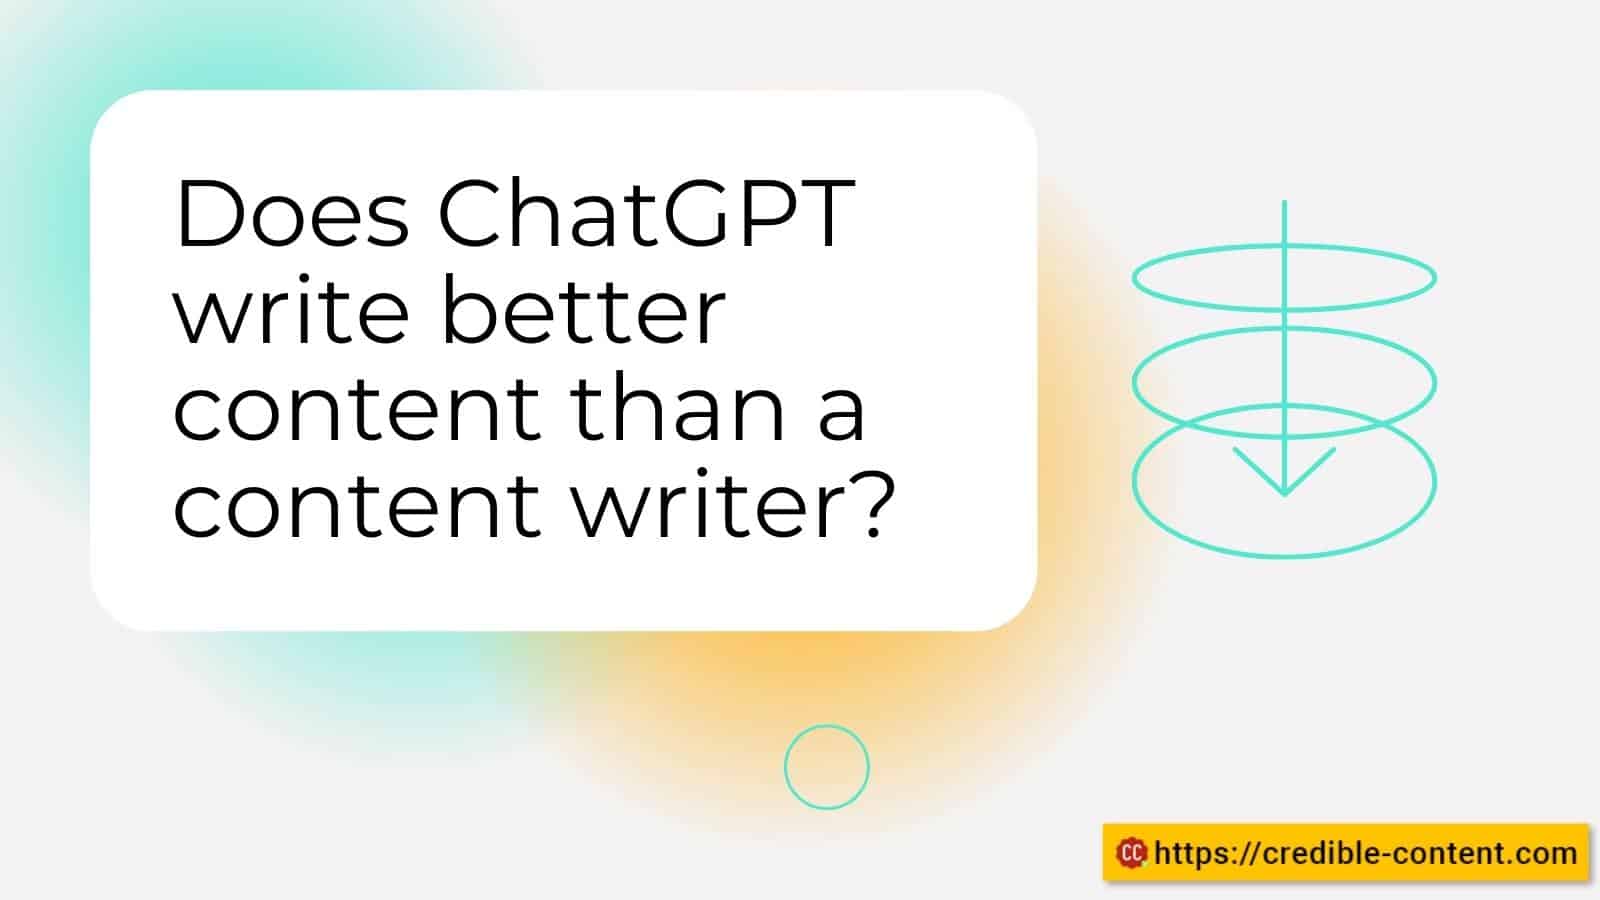 Does ChatGPT write better content than a content writer